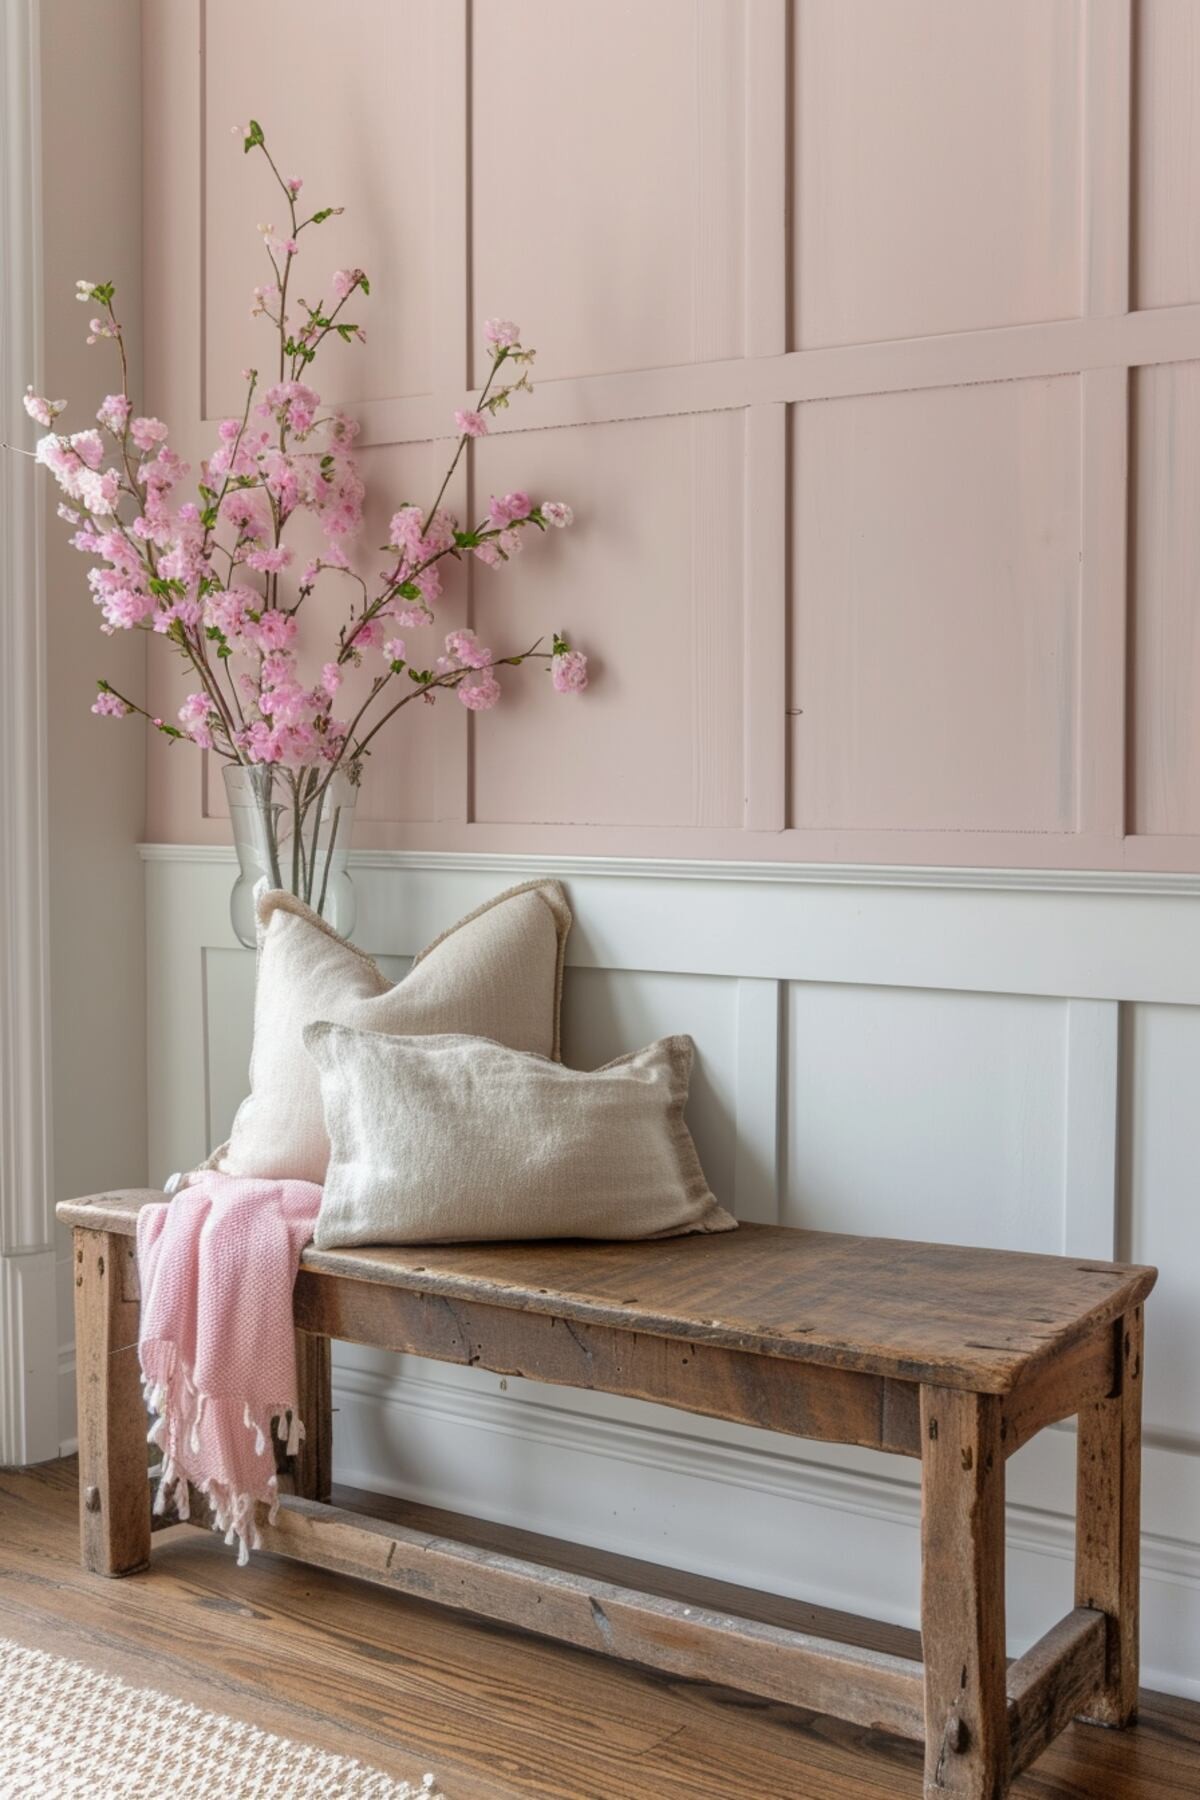 Blush and Rustic